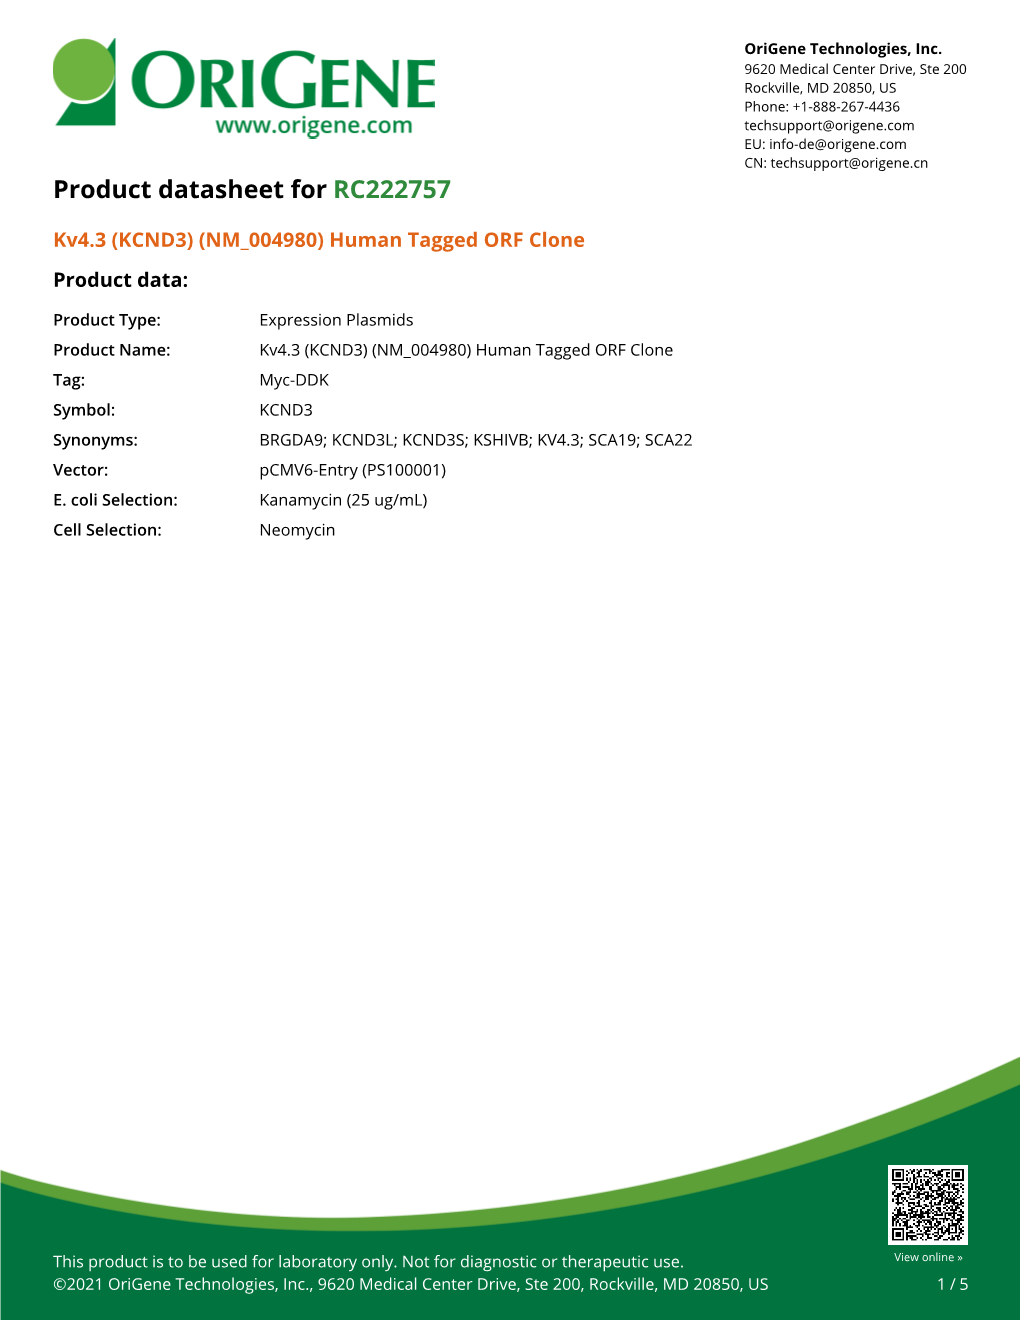 (KCND3) (NM 004980) Human Tagged ORF Clone Product Data